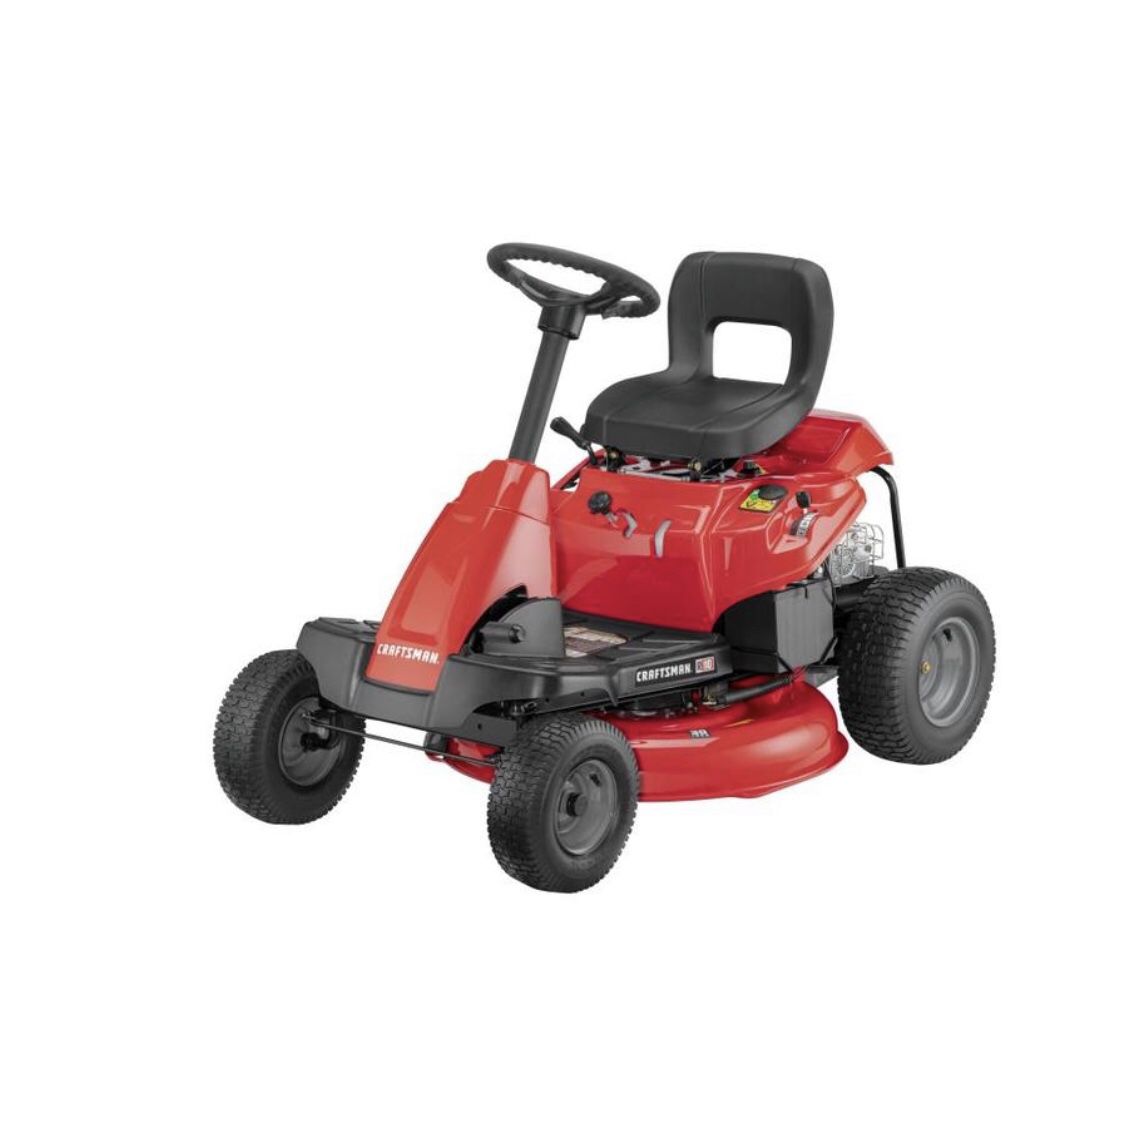 CRAFTSMAN R105-HP Manual/Gear 30-in Riding Lawn Mower for Sale in